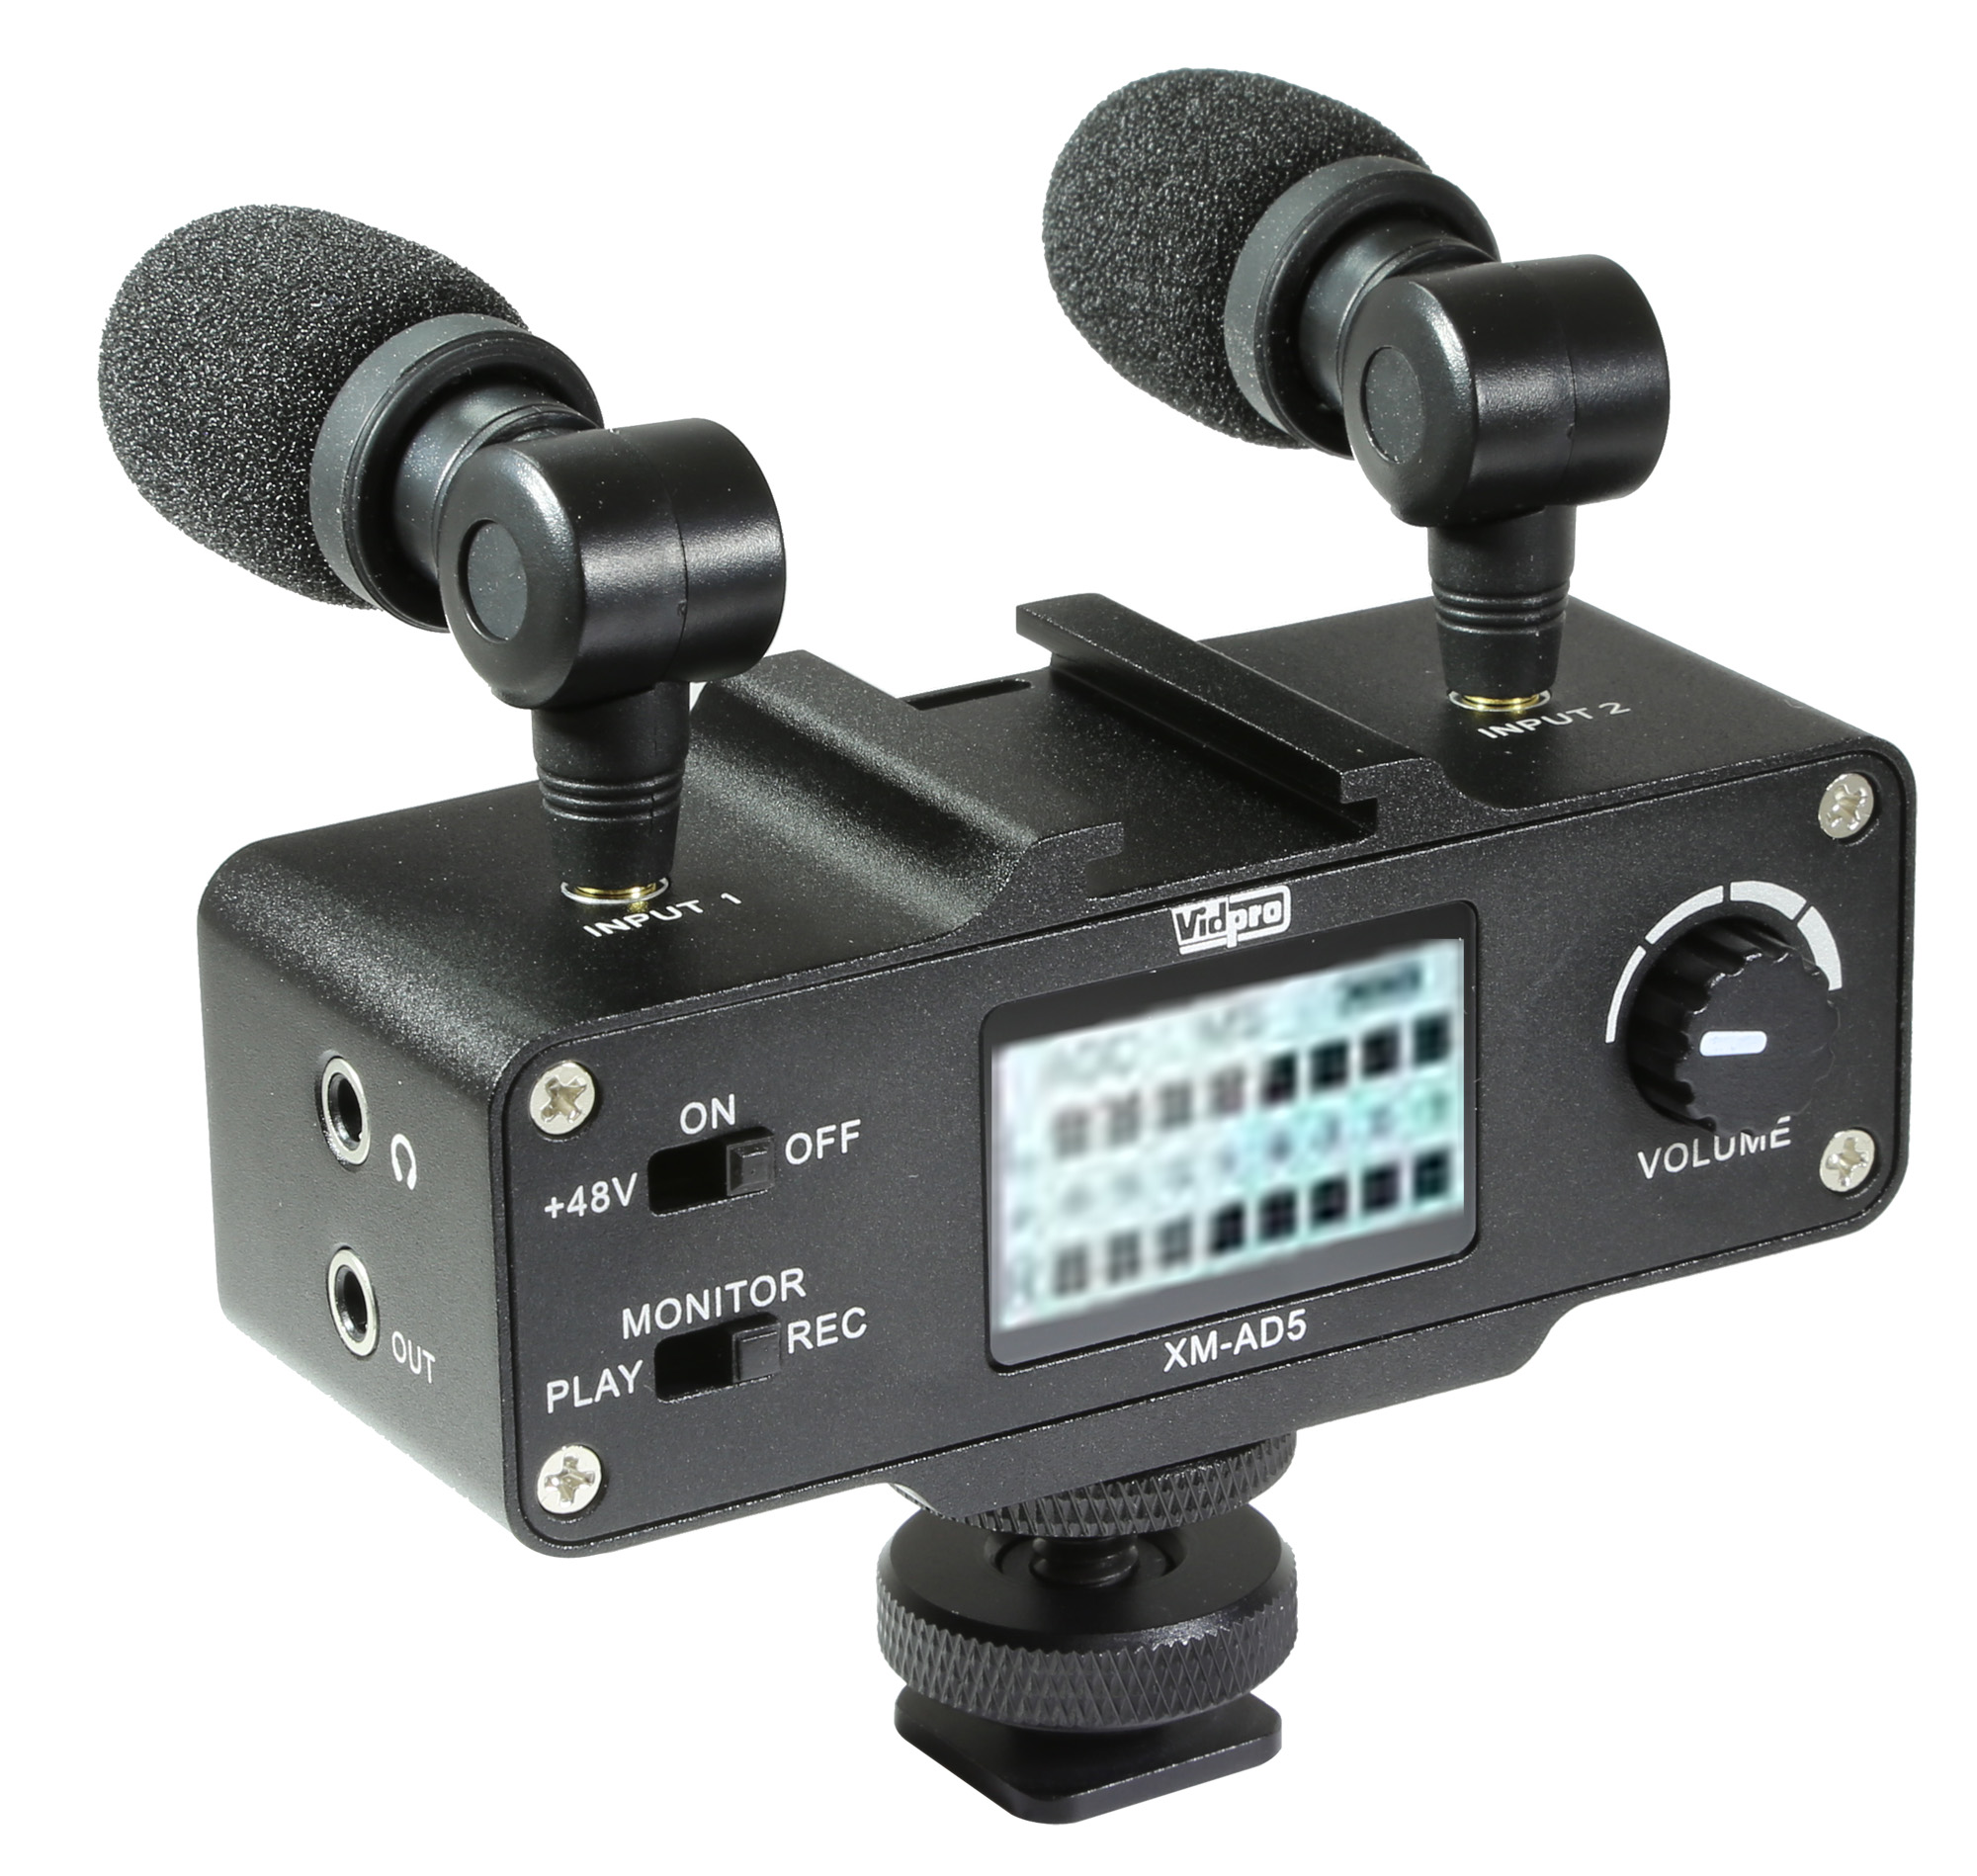 Vidpro XM-AD5 Mini Pre-Amp Smart Mixer with Dual Condenser Microphones for DSLRs, Video Cameras and Phones